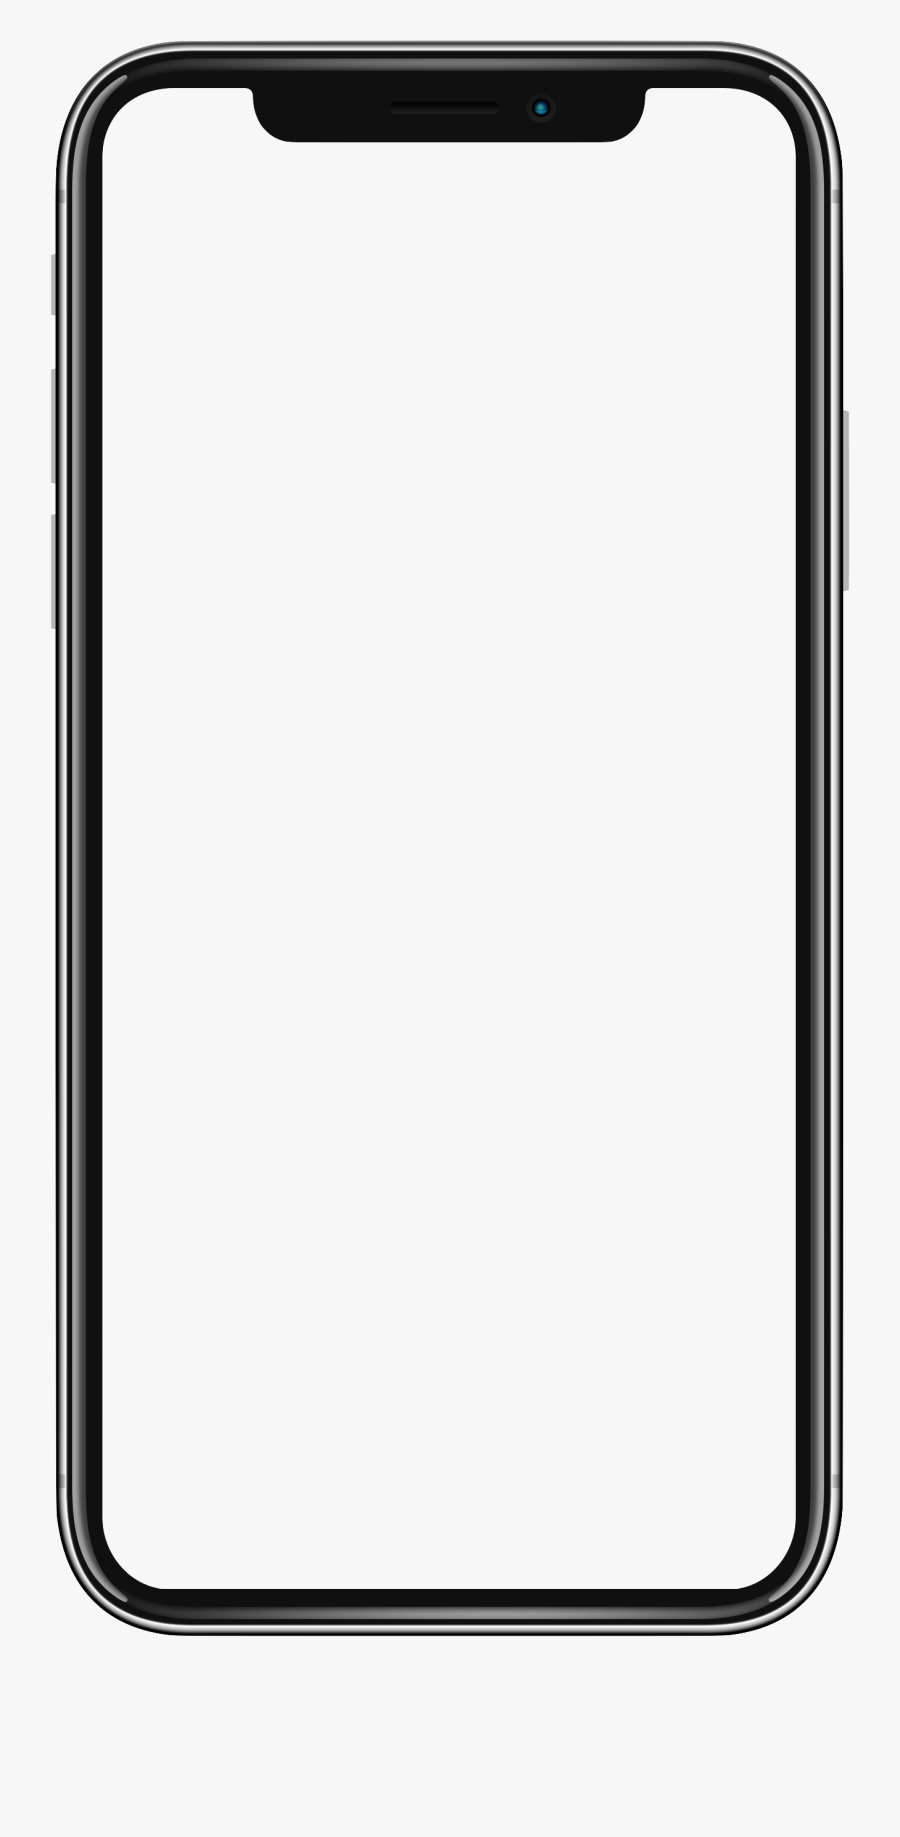 Iphone 4 Wallpaper Png - Iphone Xs White Background, Transparent Clipart